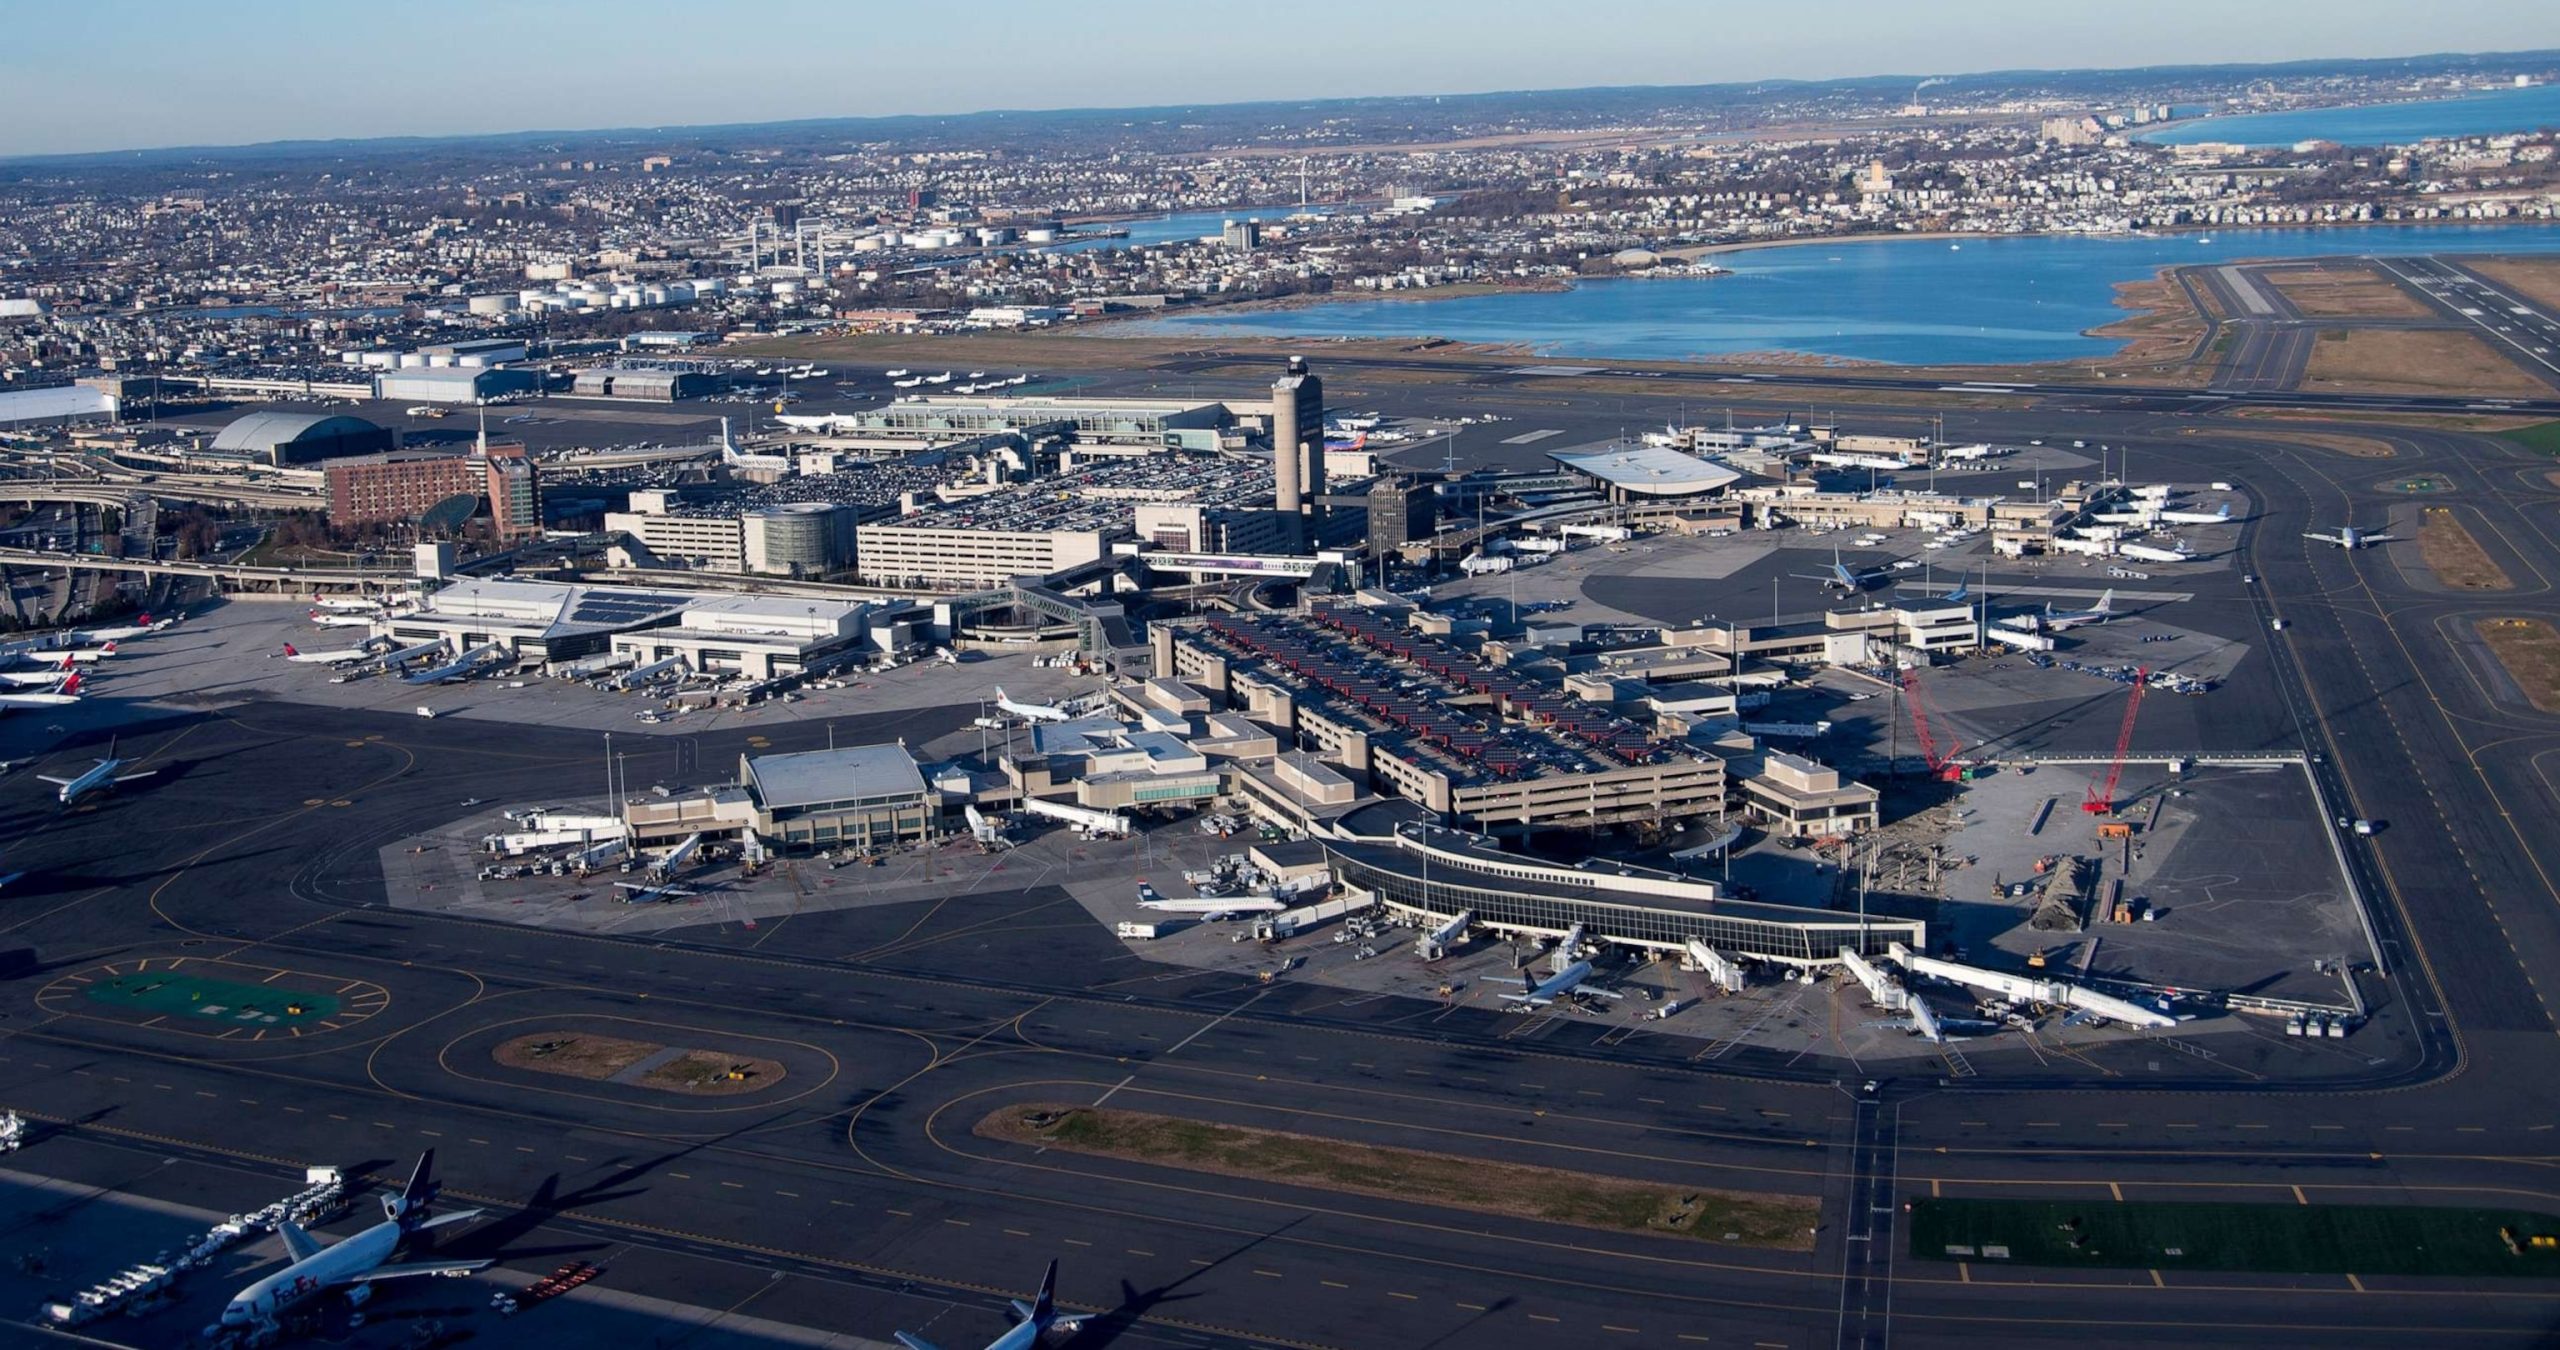 Missing Woman Found Dead at Boston Airport Sparks International Manhunt